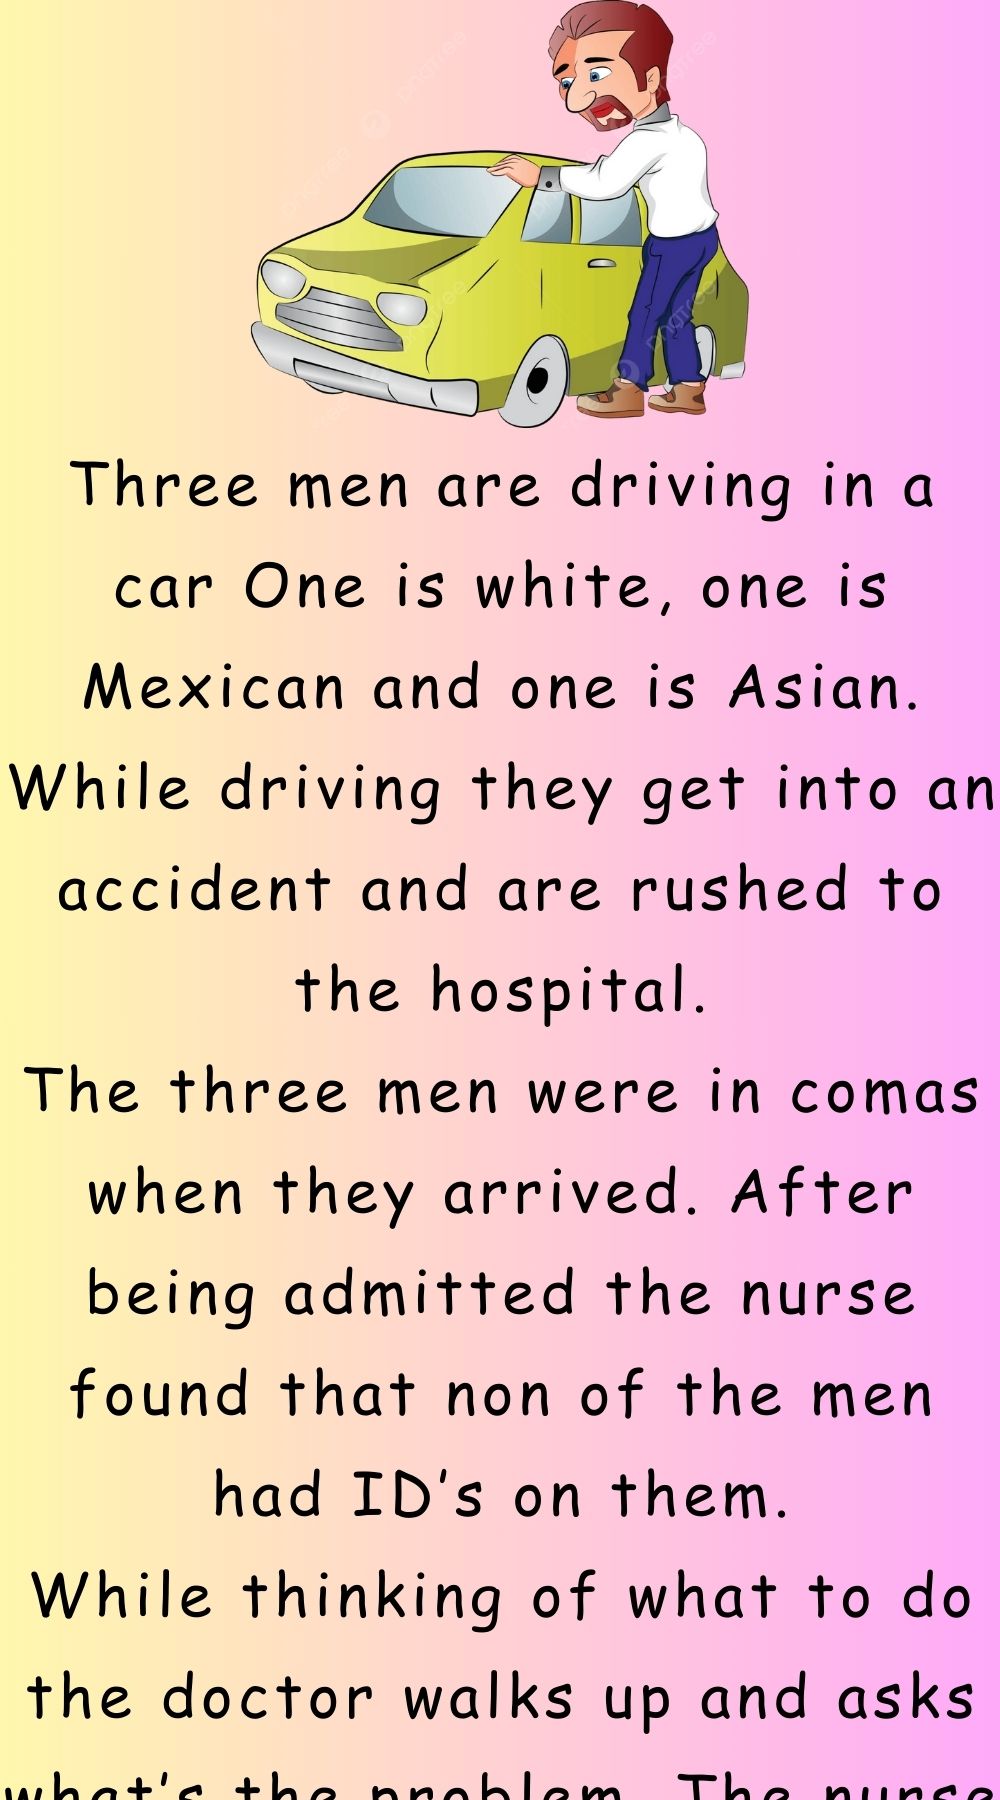 Three men are driving in a car